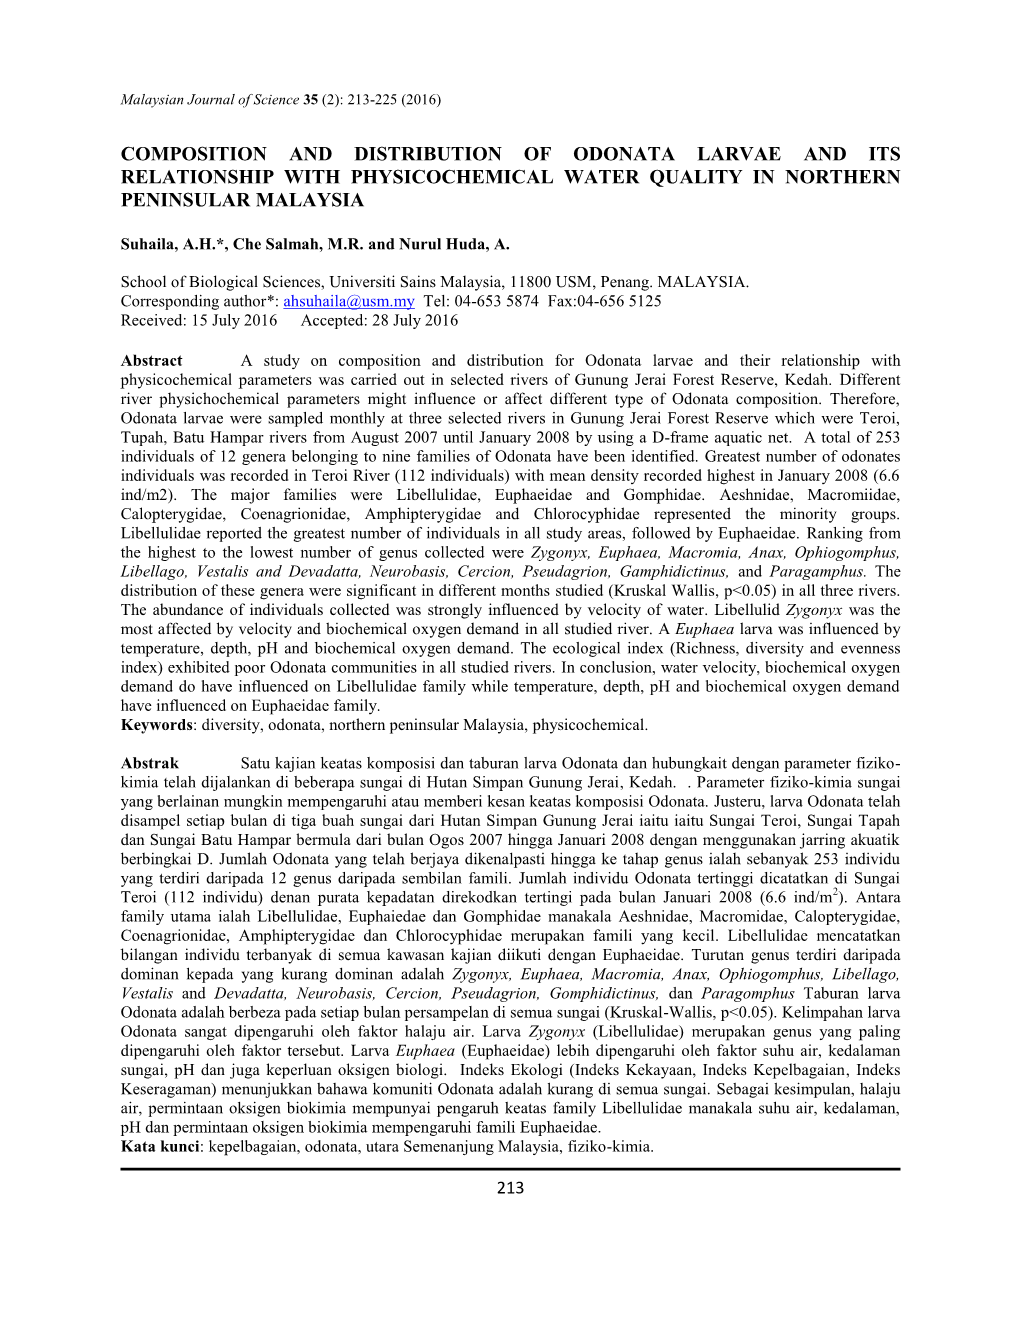 Composition and Distribution of Odonata Larvae and Its Relationship with Physicochemical Water Quality in Northern Peninsular Malaysia